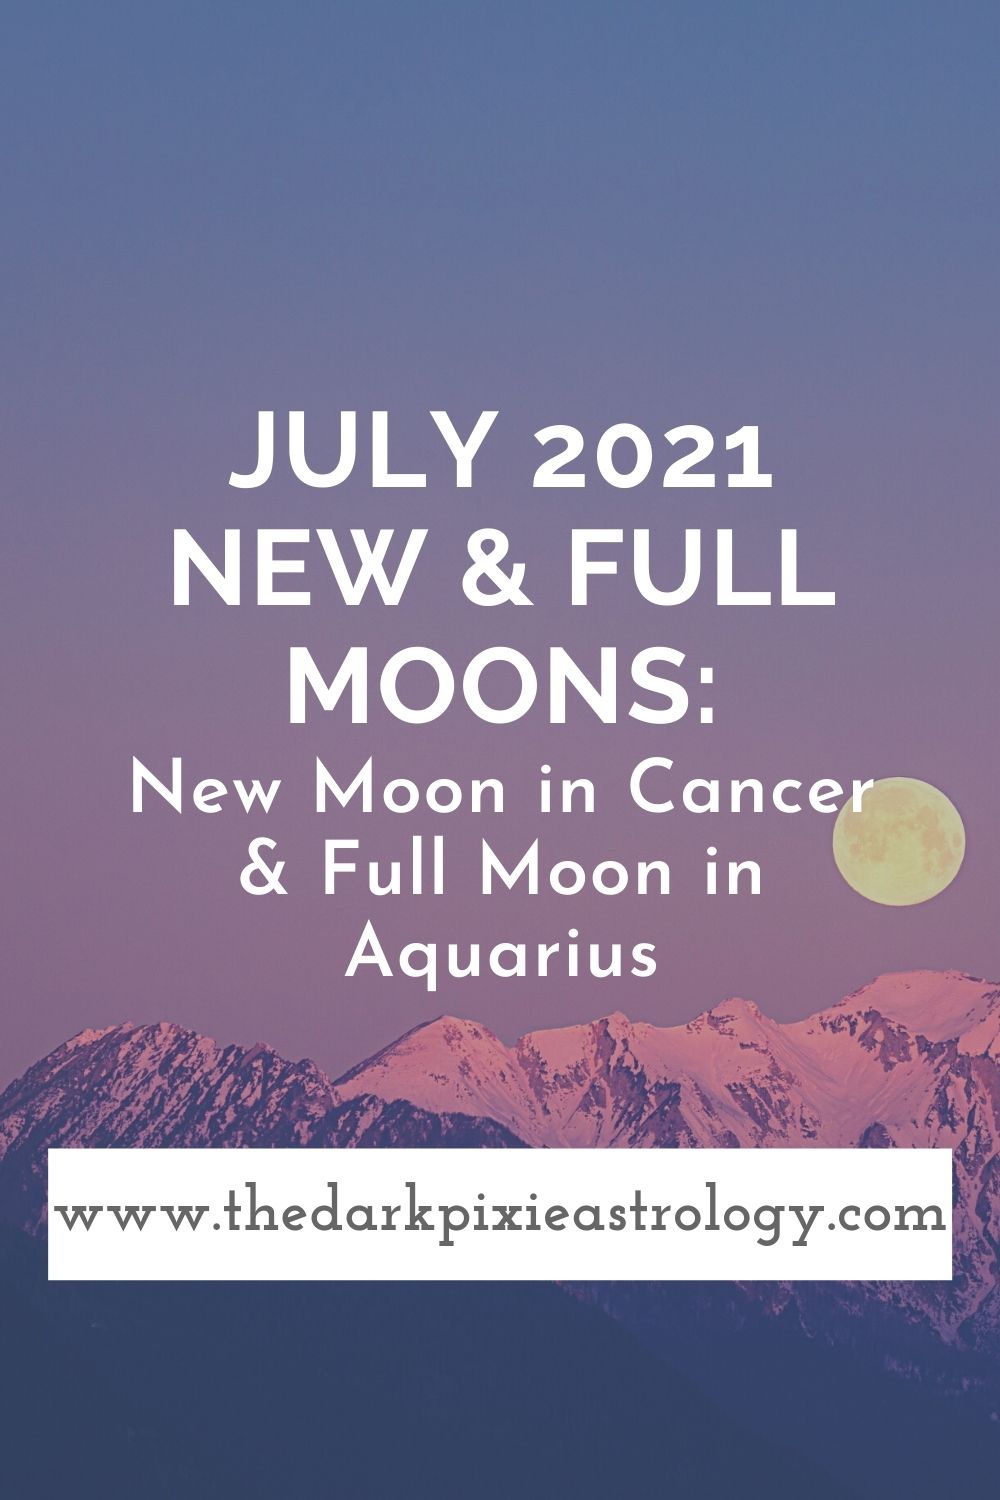 July 2021 New & Full Moons: New Moon in Cancer & Full Moon in Aquarius - The Dark Pixie Astrology